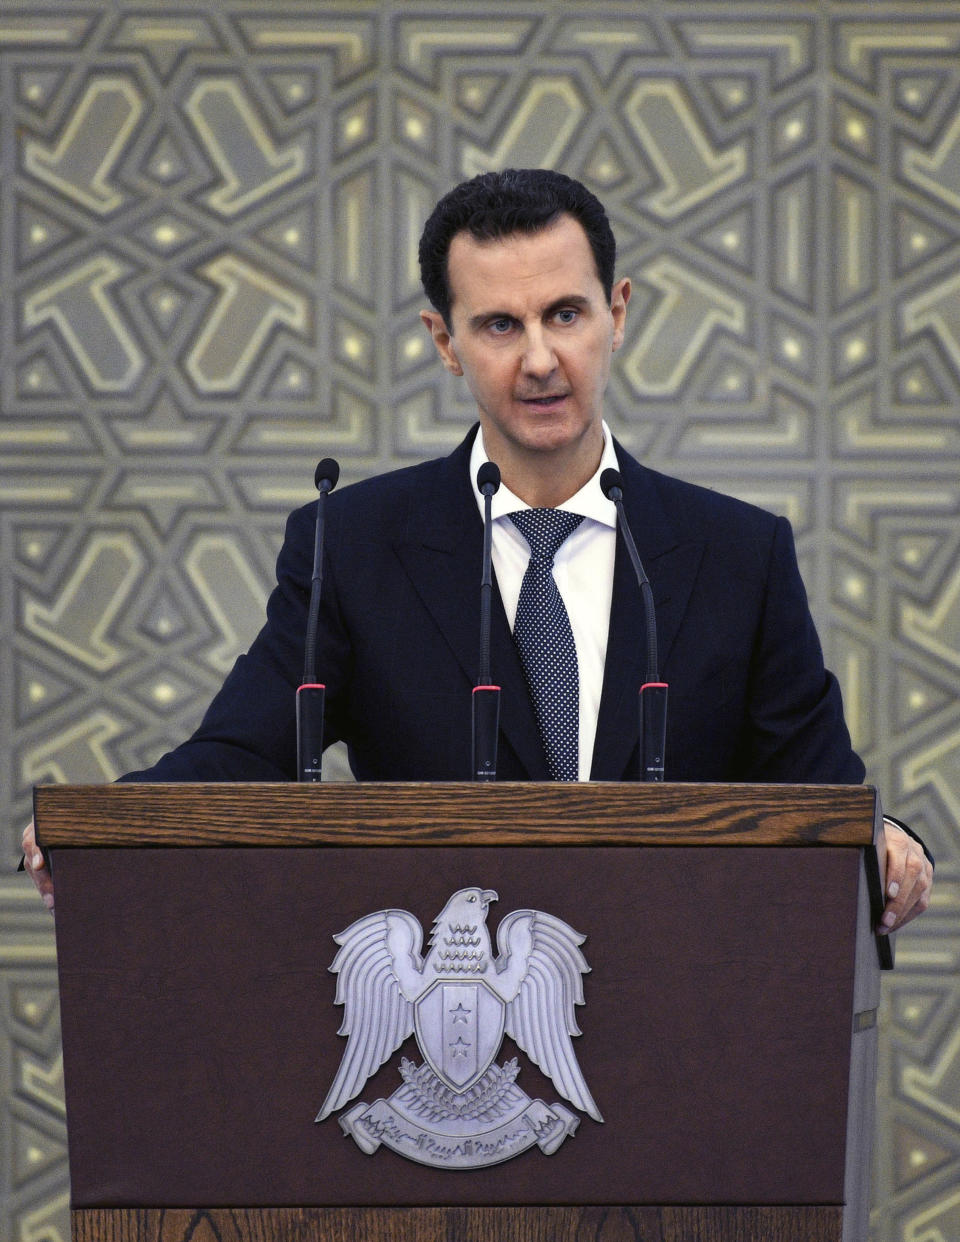 In this photo released by the Syrian official news agency SANA, Syrian President Bashar Assad speaks during a meeting with heads of local councils from all Syrian provinces, in Damascus, Syria, Sunday, Feb. 17, 2018. Assad said that only the Syrian army can protect groups in northern Syria. In a speech he appeared to be referring to U.S.-allied Kurdish groups, which fear a Turkish assault once American troops withdraw from northeastern Syria. (SANA via AP)